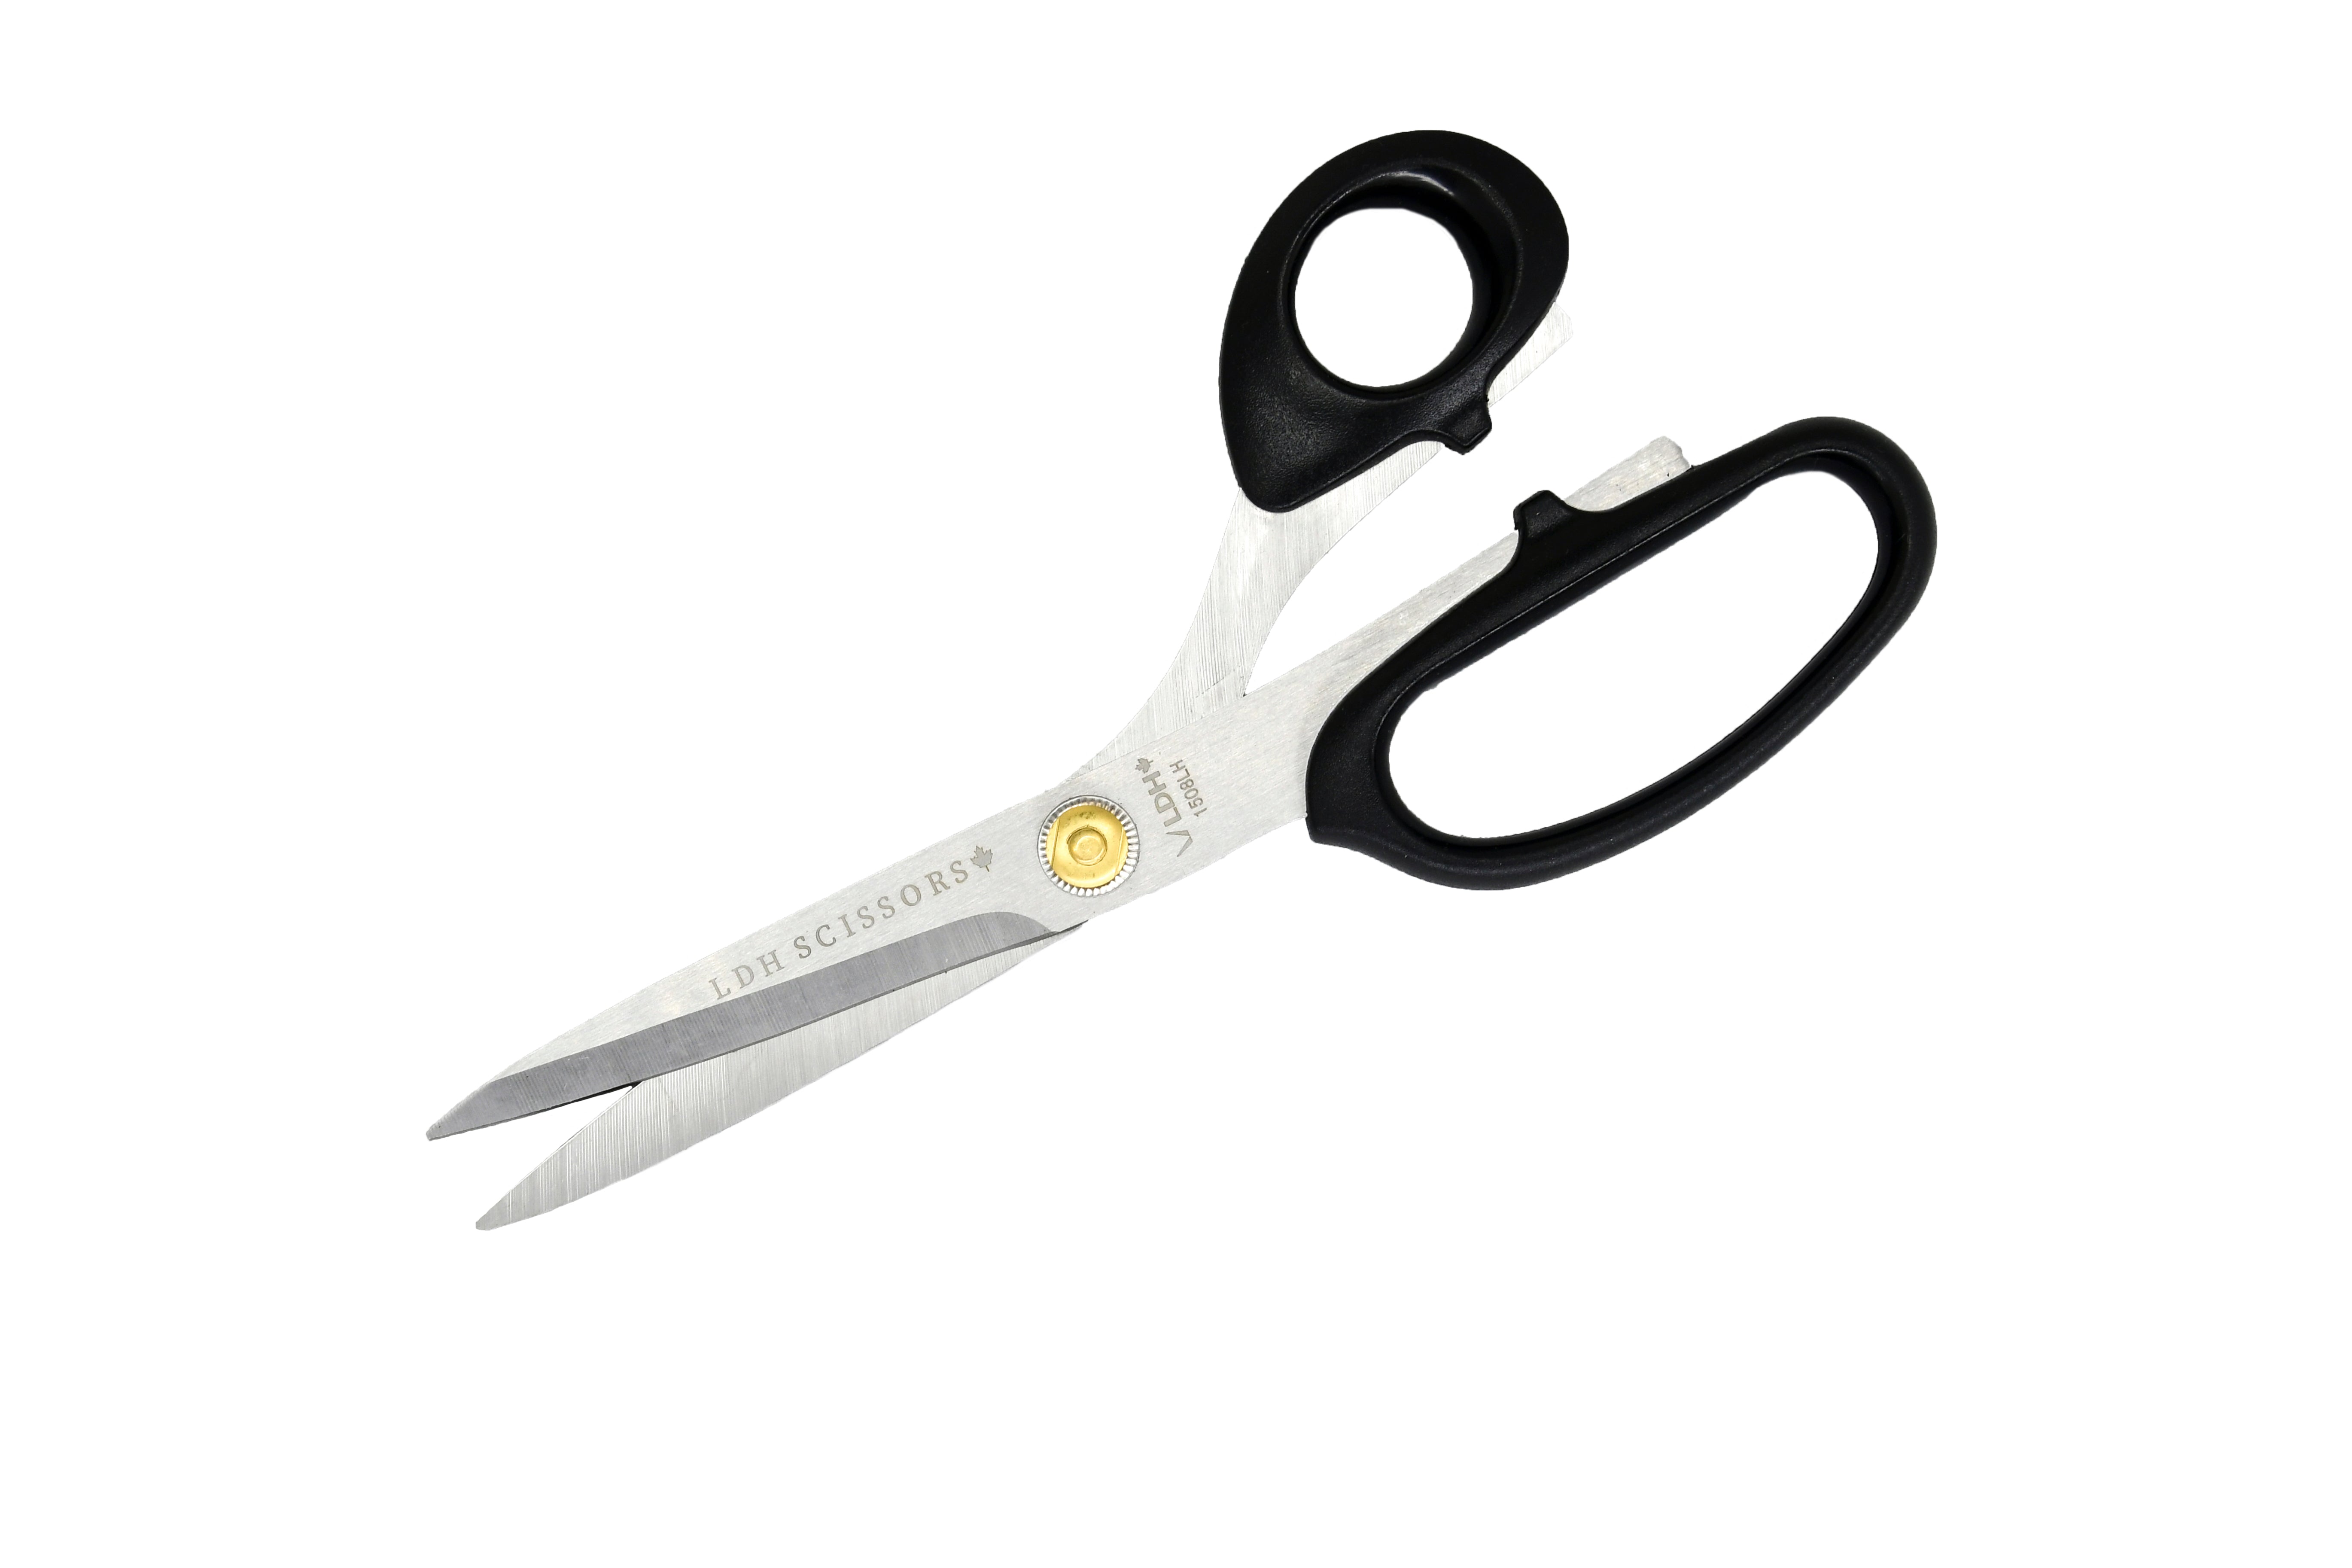 8.25 Left-Handed Fabric, Dressmaking, Sewing Shears - Tenartis 555 Made in Italy